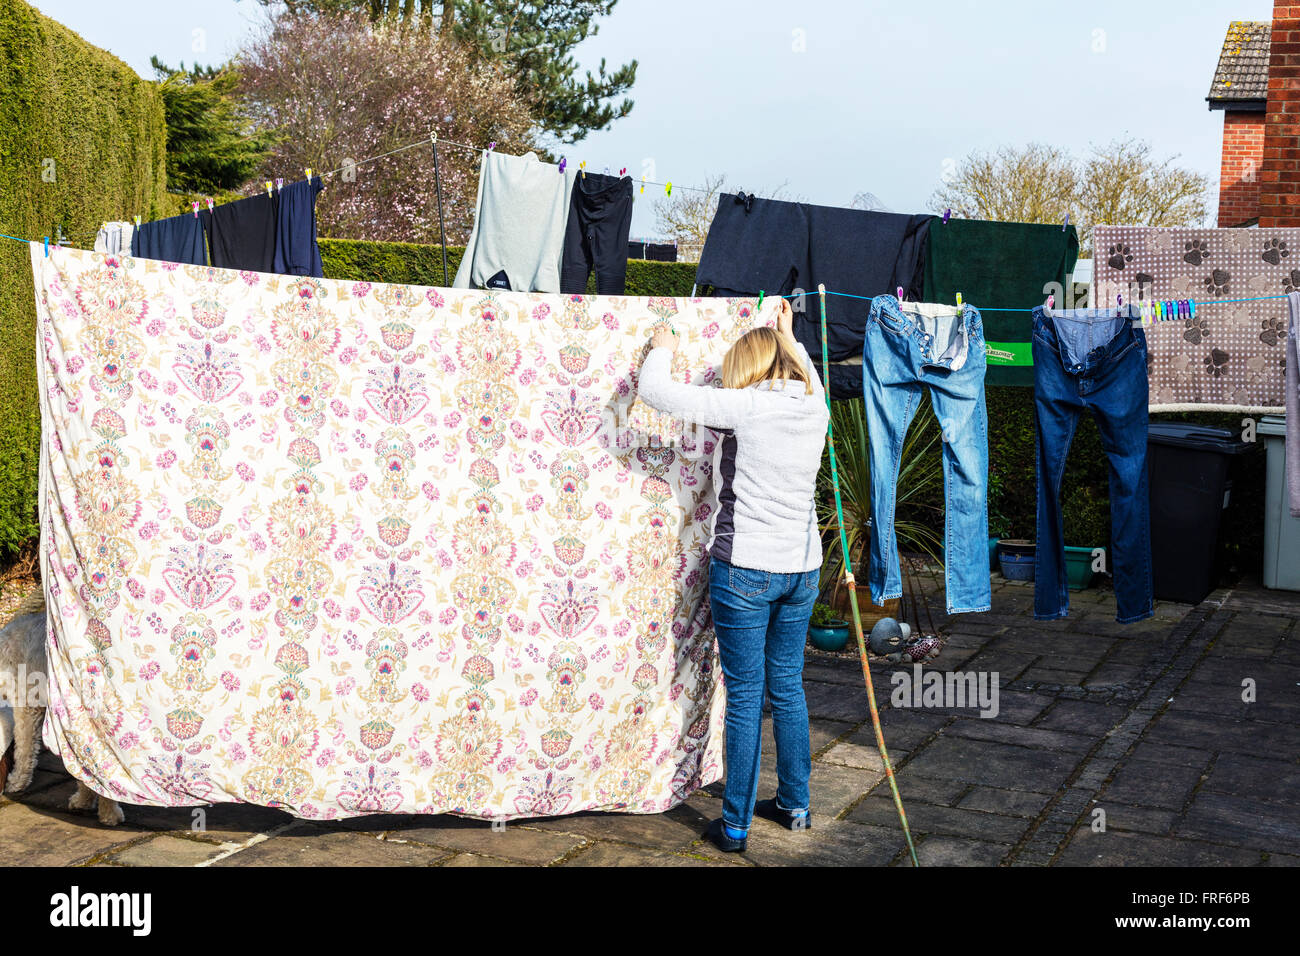 pegging out clothes Putting washing on line hanging washing out to dry wash day  UK England GB Stock Photo